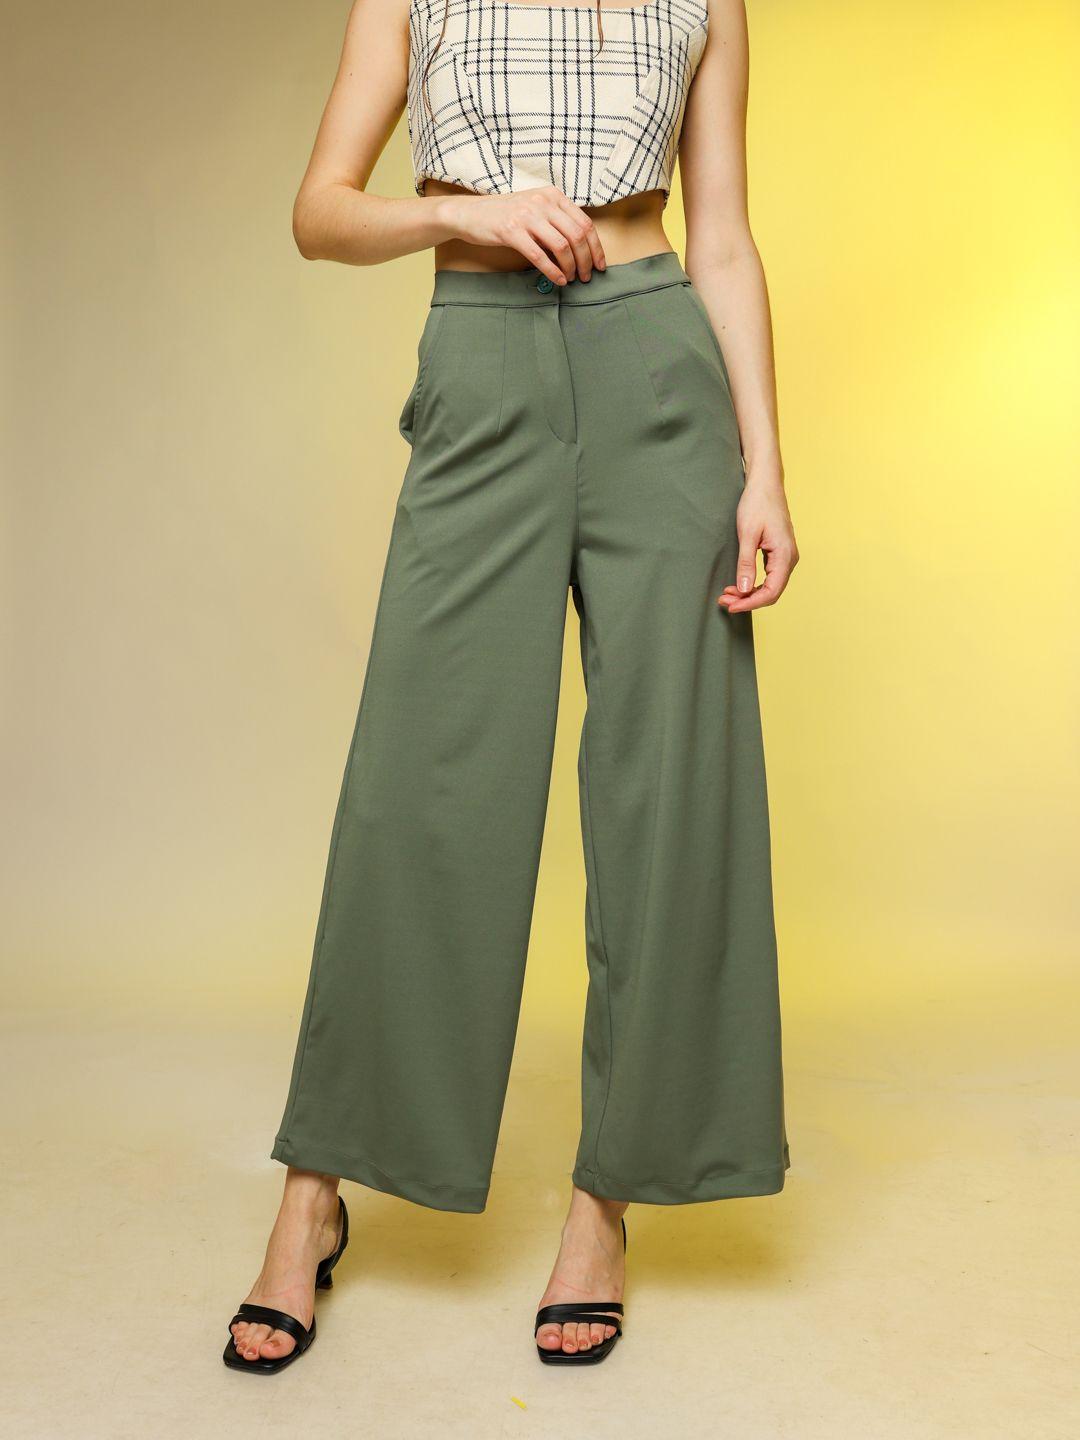 stylecast-x-hersheinbox-women-solid-trousers